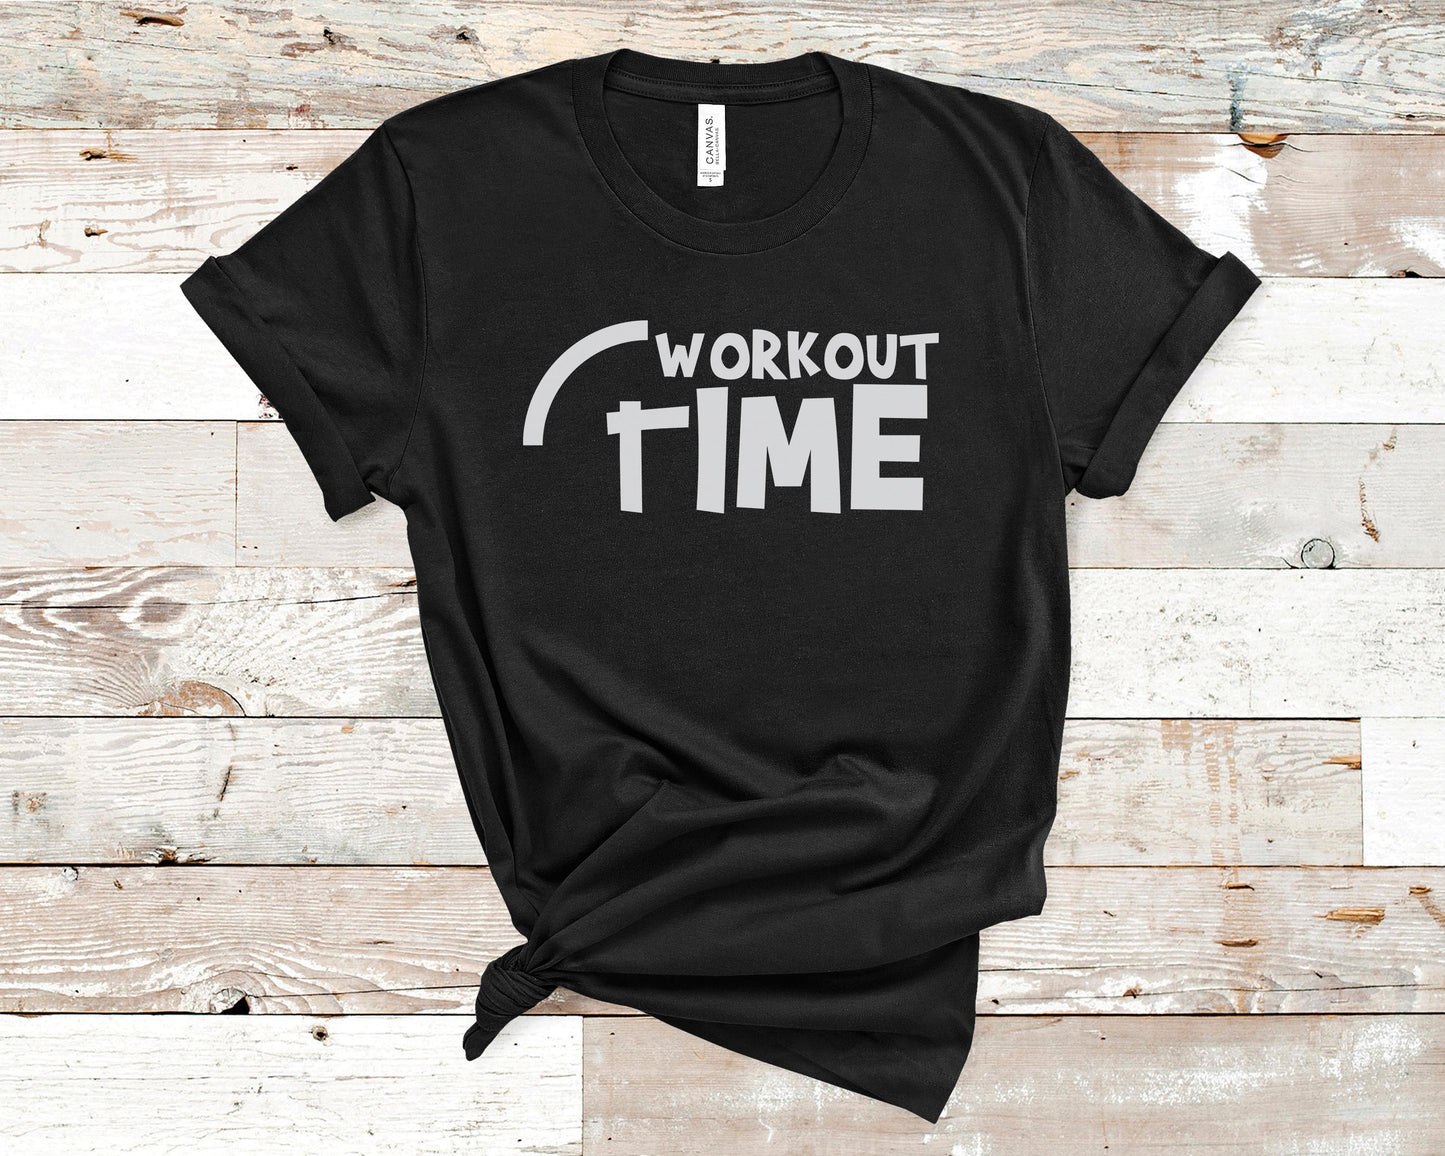 Workout Time - Fitness Shirt